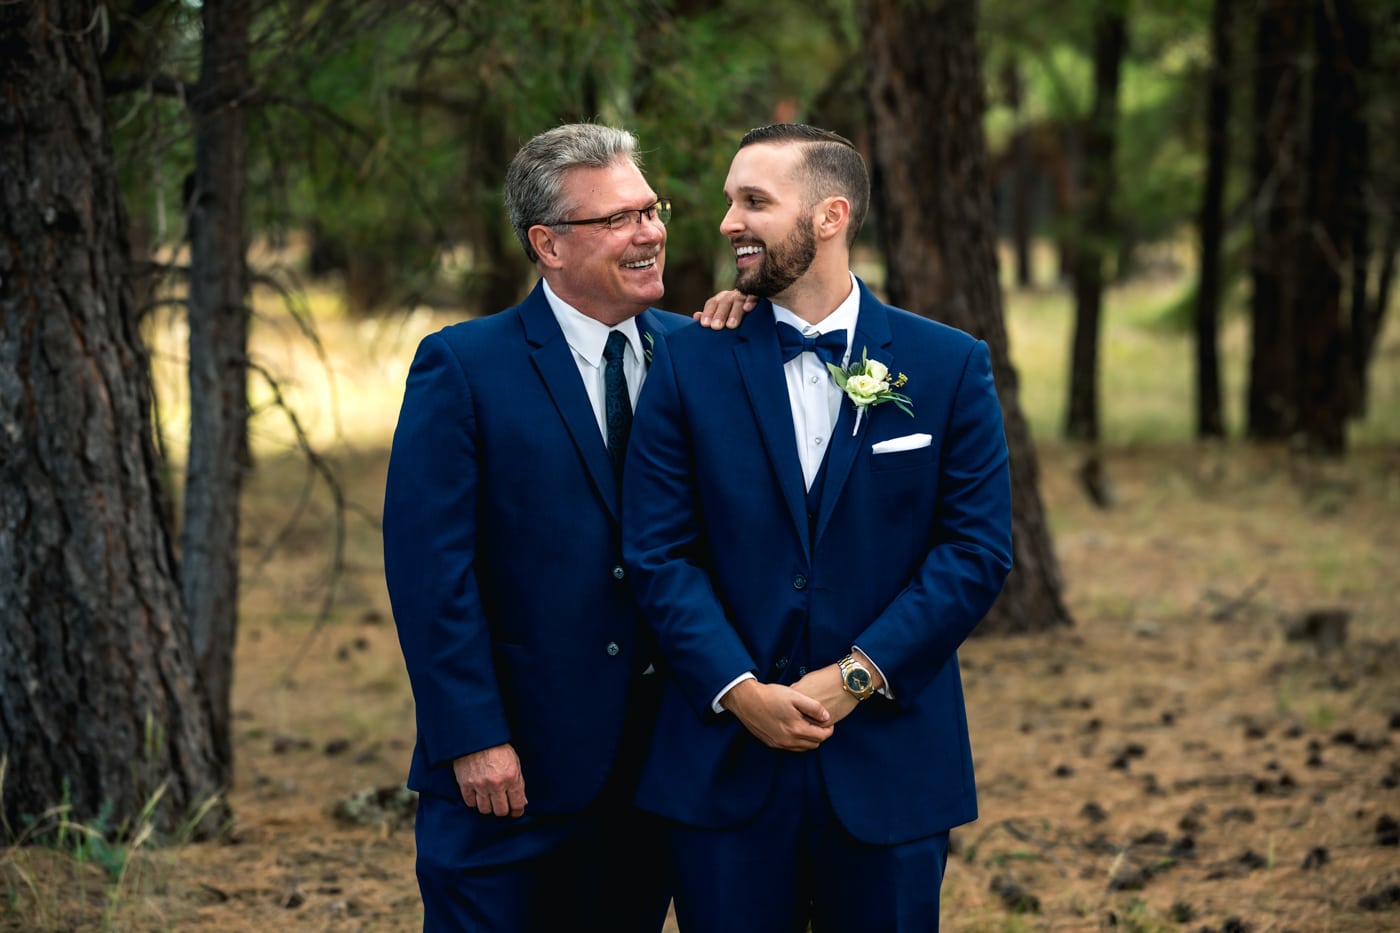 Groom with father smiling at each other